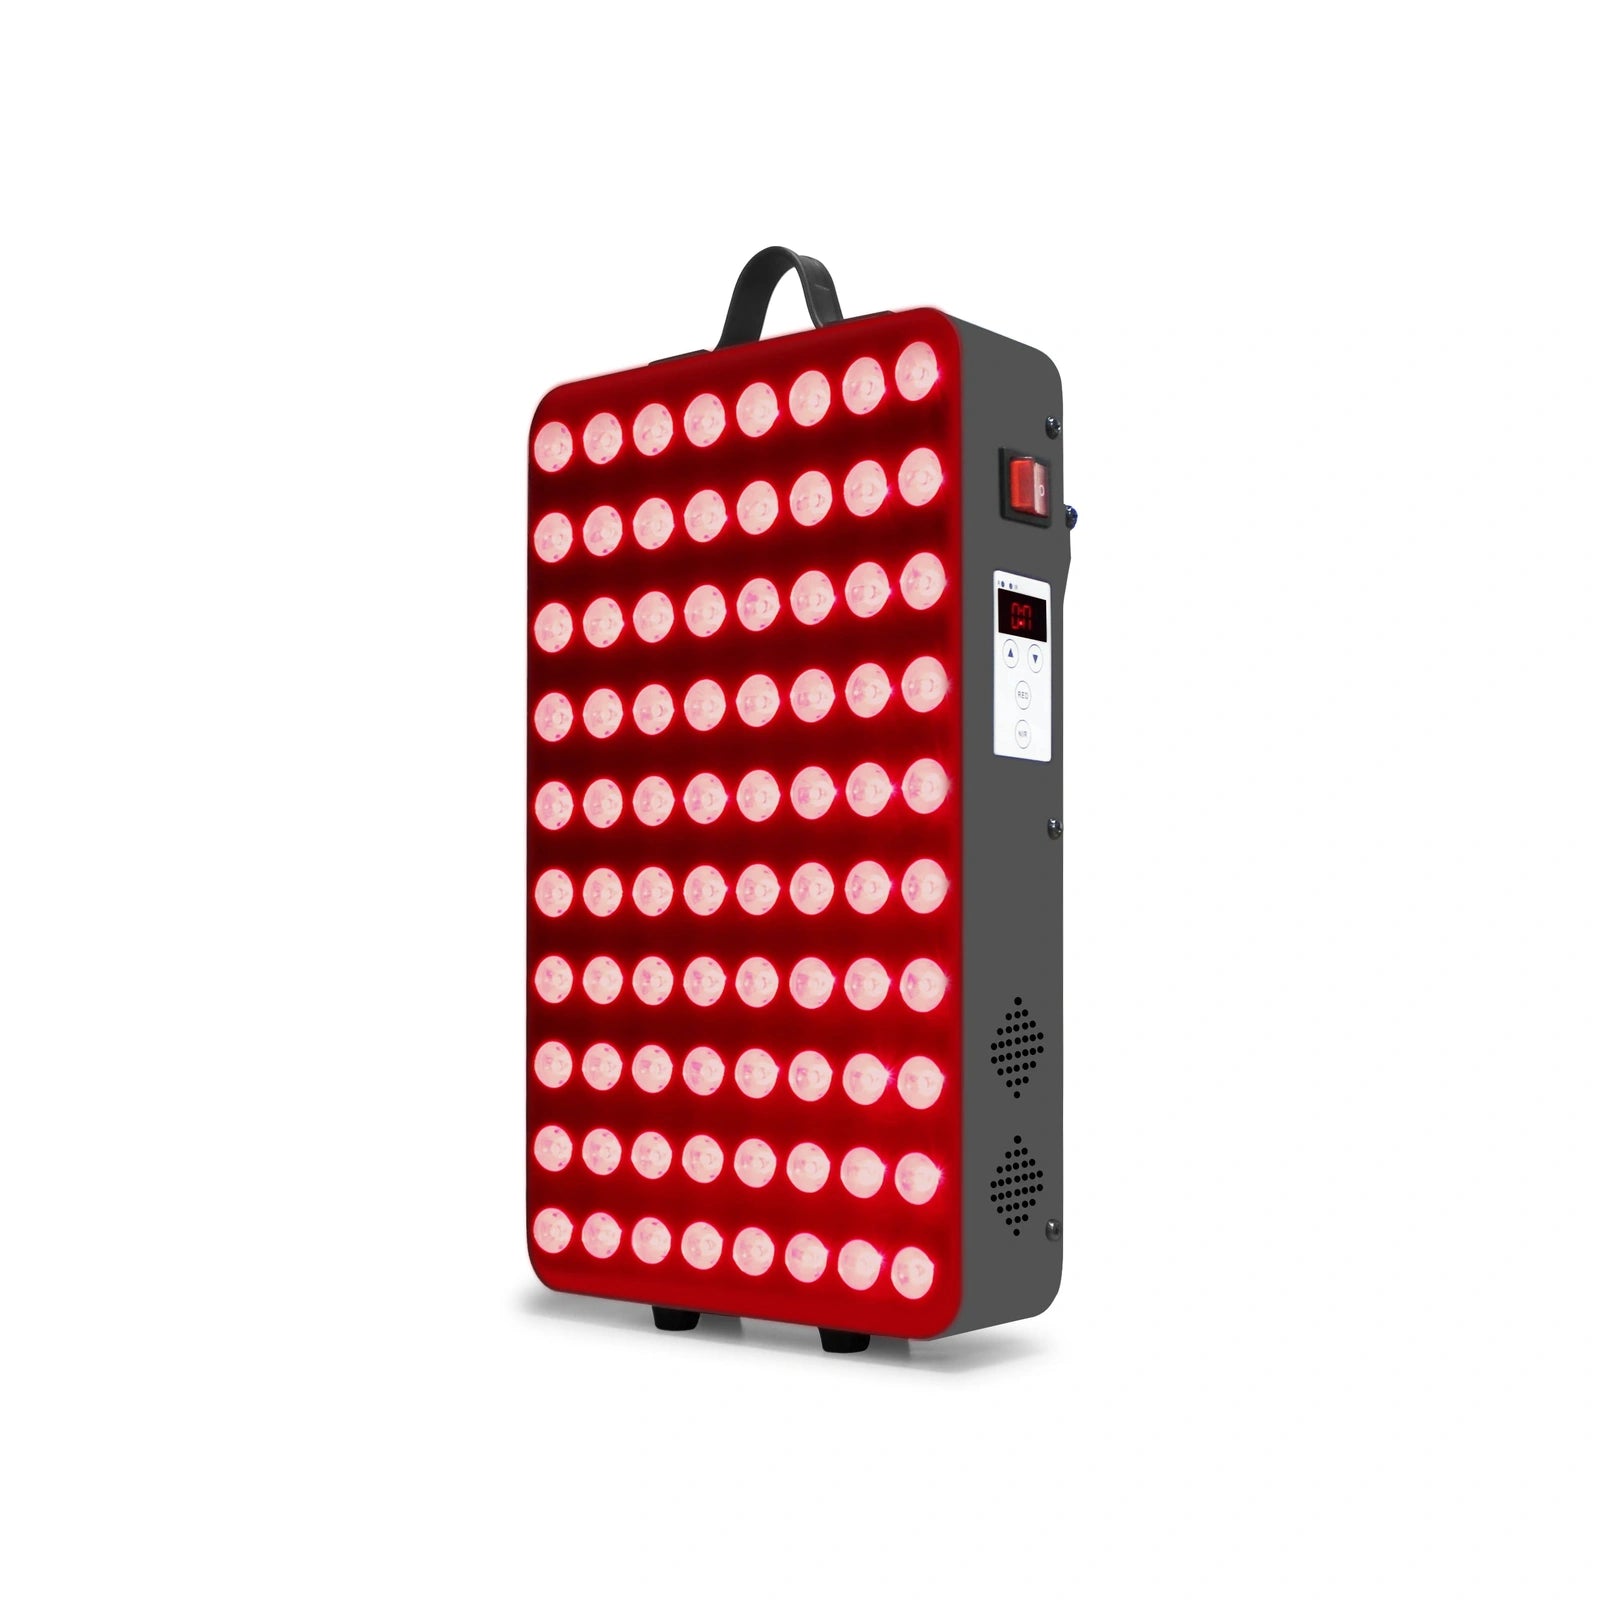 InzysRedPanel - Red Light Therapy Panel for Home Use